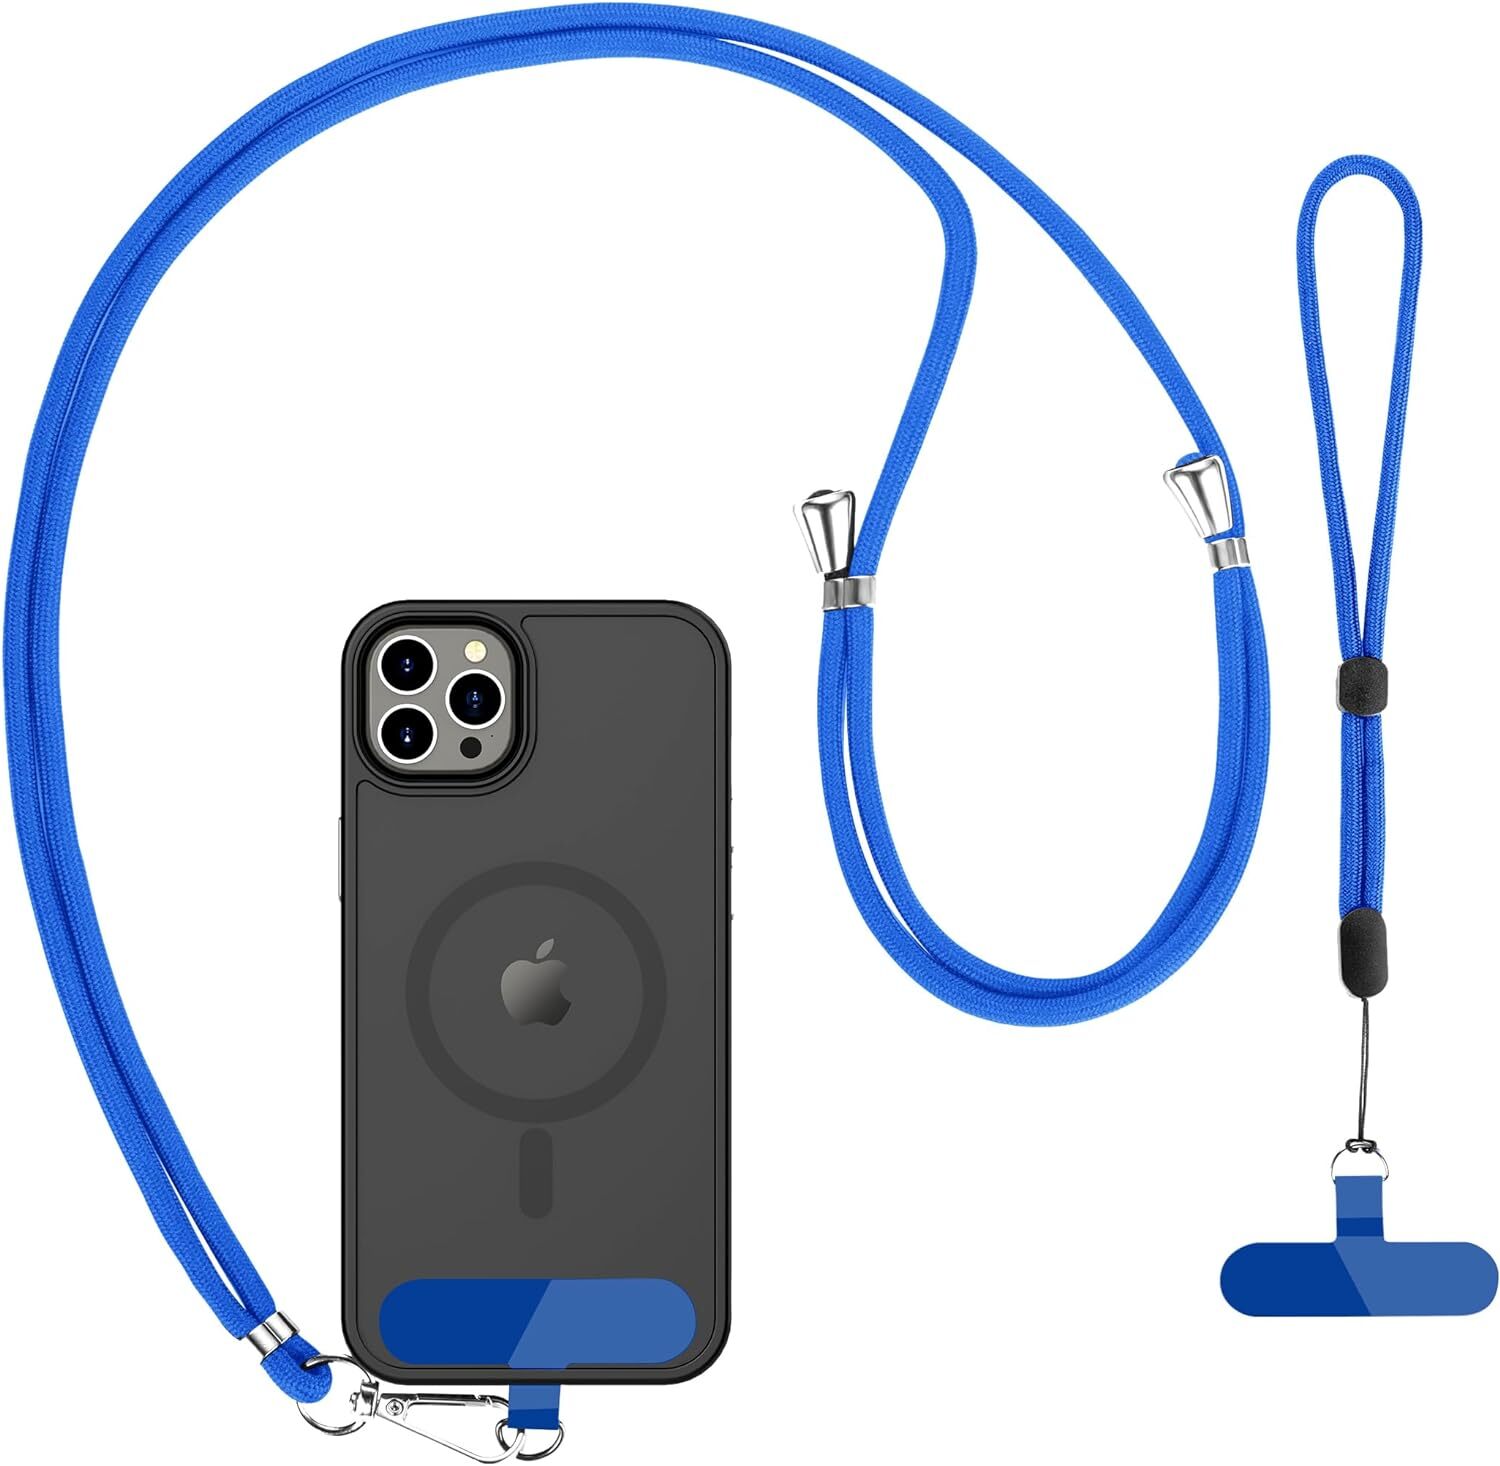 A blue lanyard attached to a smartphone